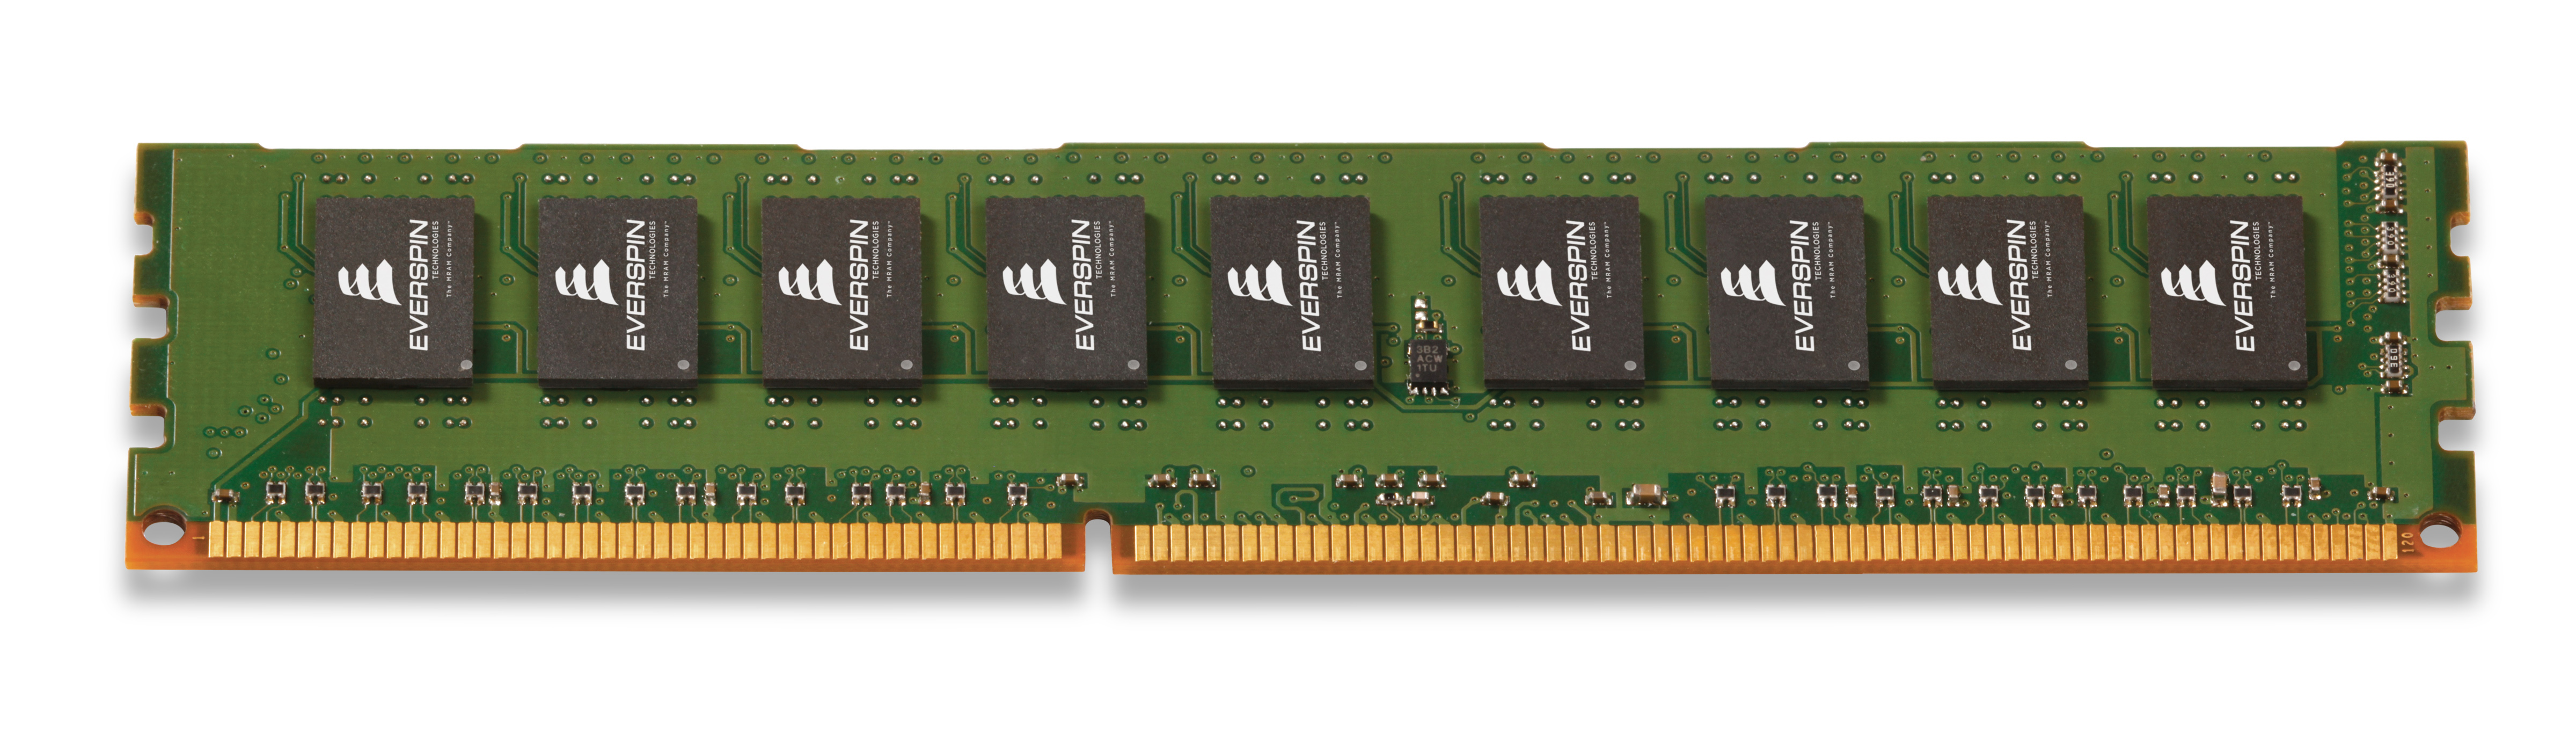 Everspin Ships First ST-MRAM Memory With 500X Performance of Flash